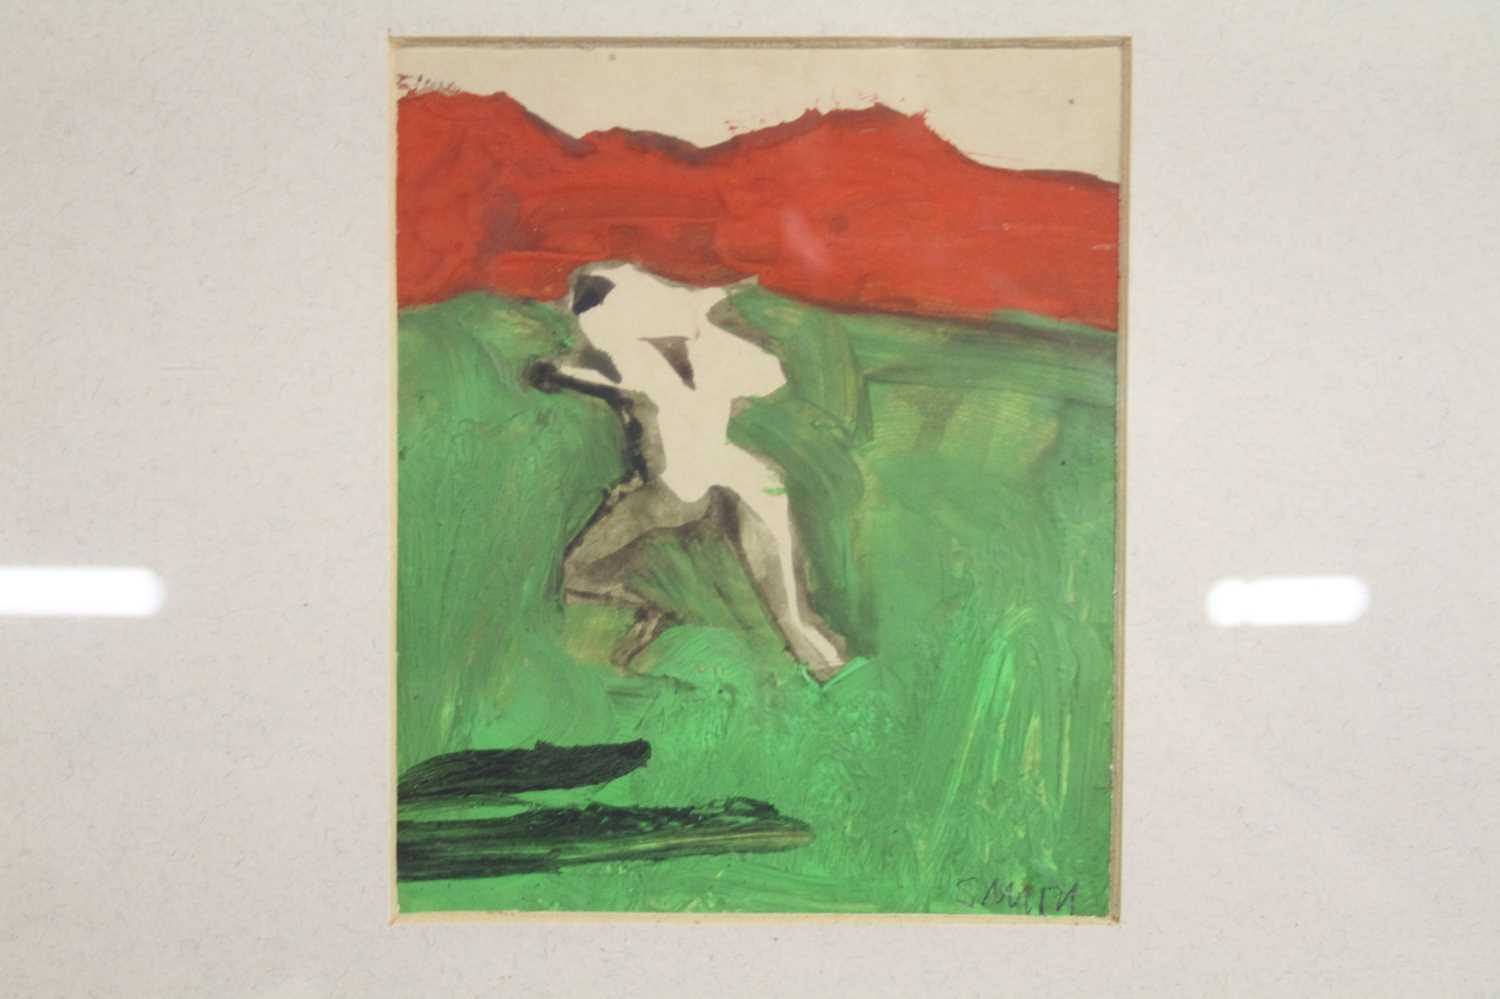 Stan Smith (1929-2001) - Abstract figure in a landscape, acrylic on paper, signed in pencil lower - Image 2 of 3